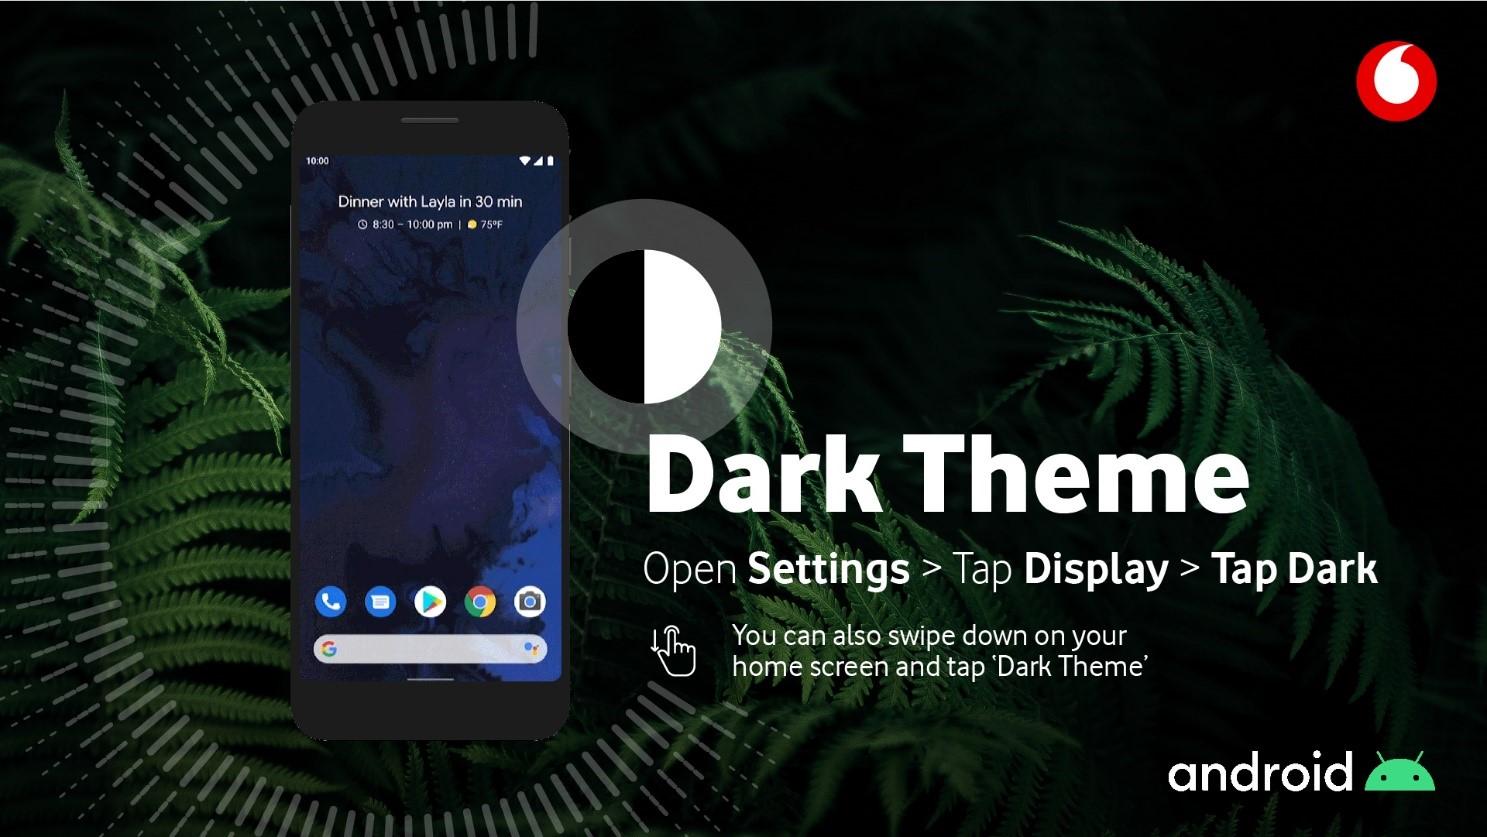 Where you can find Dark Theme.